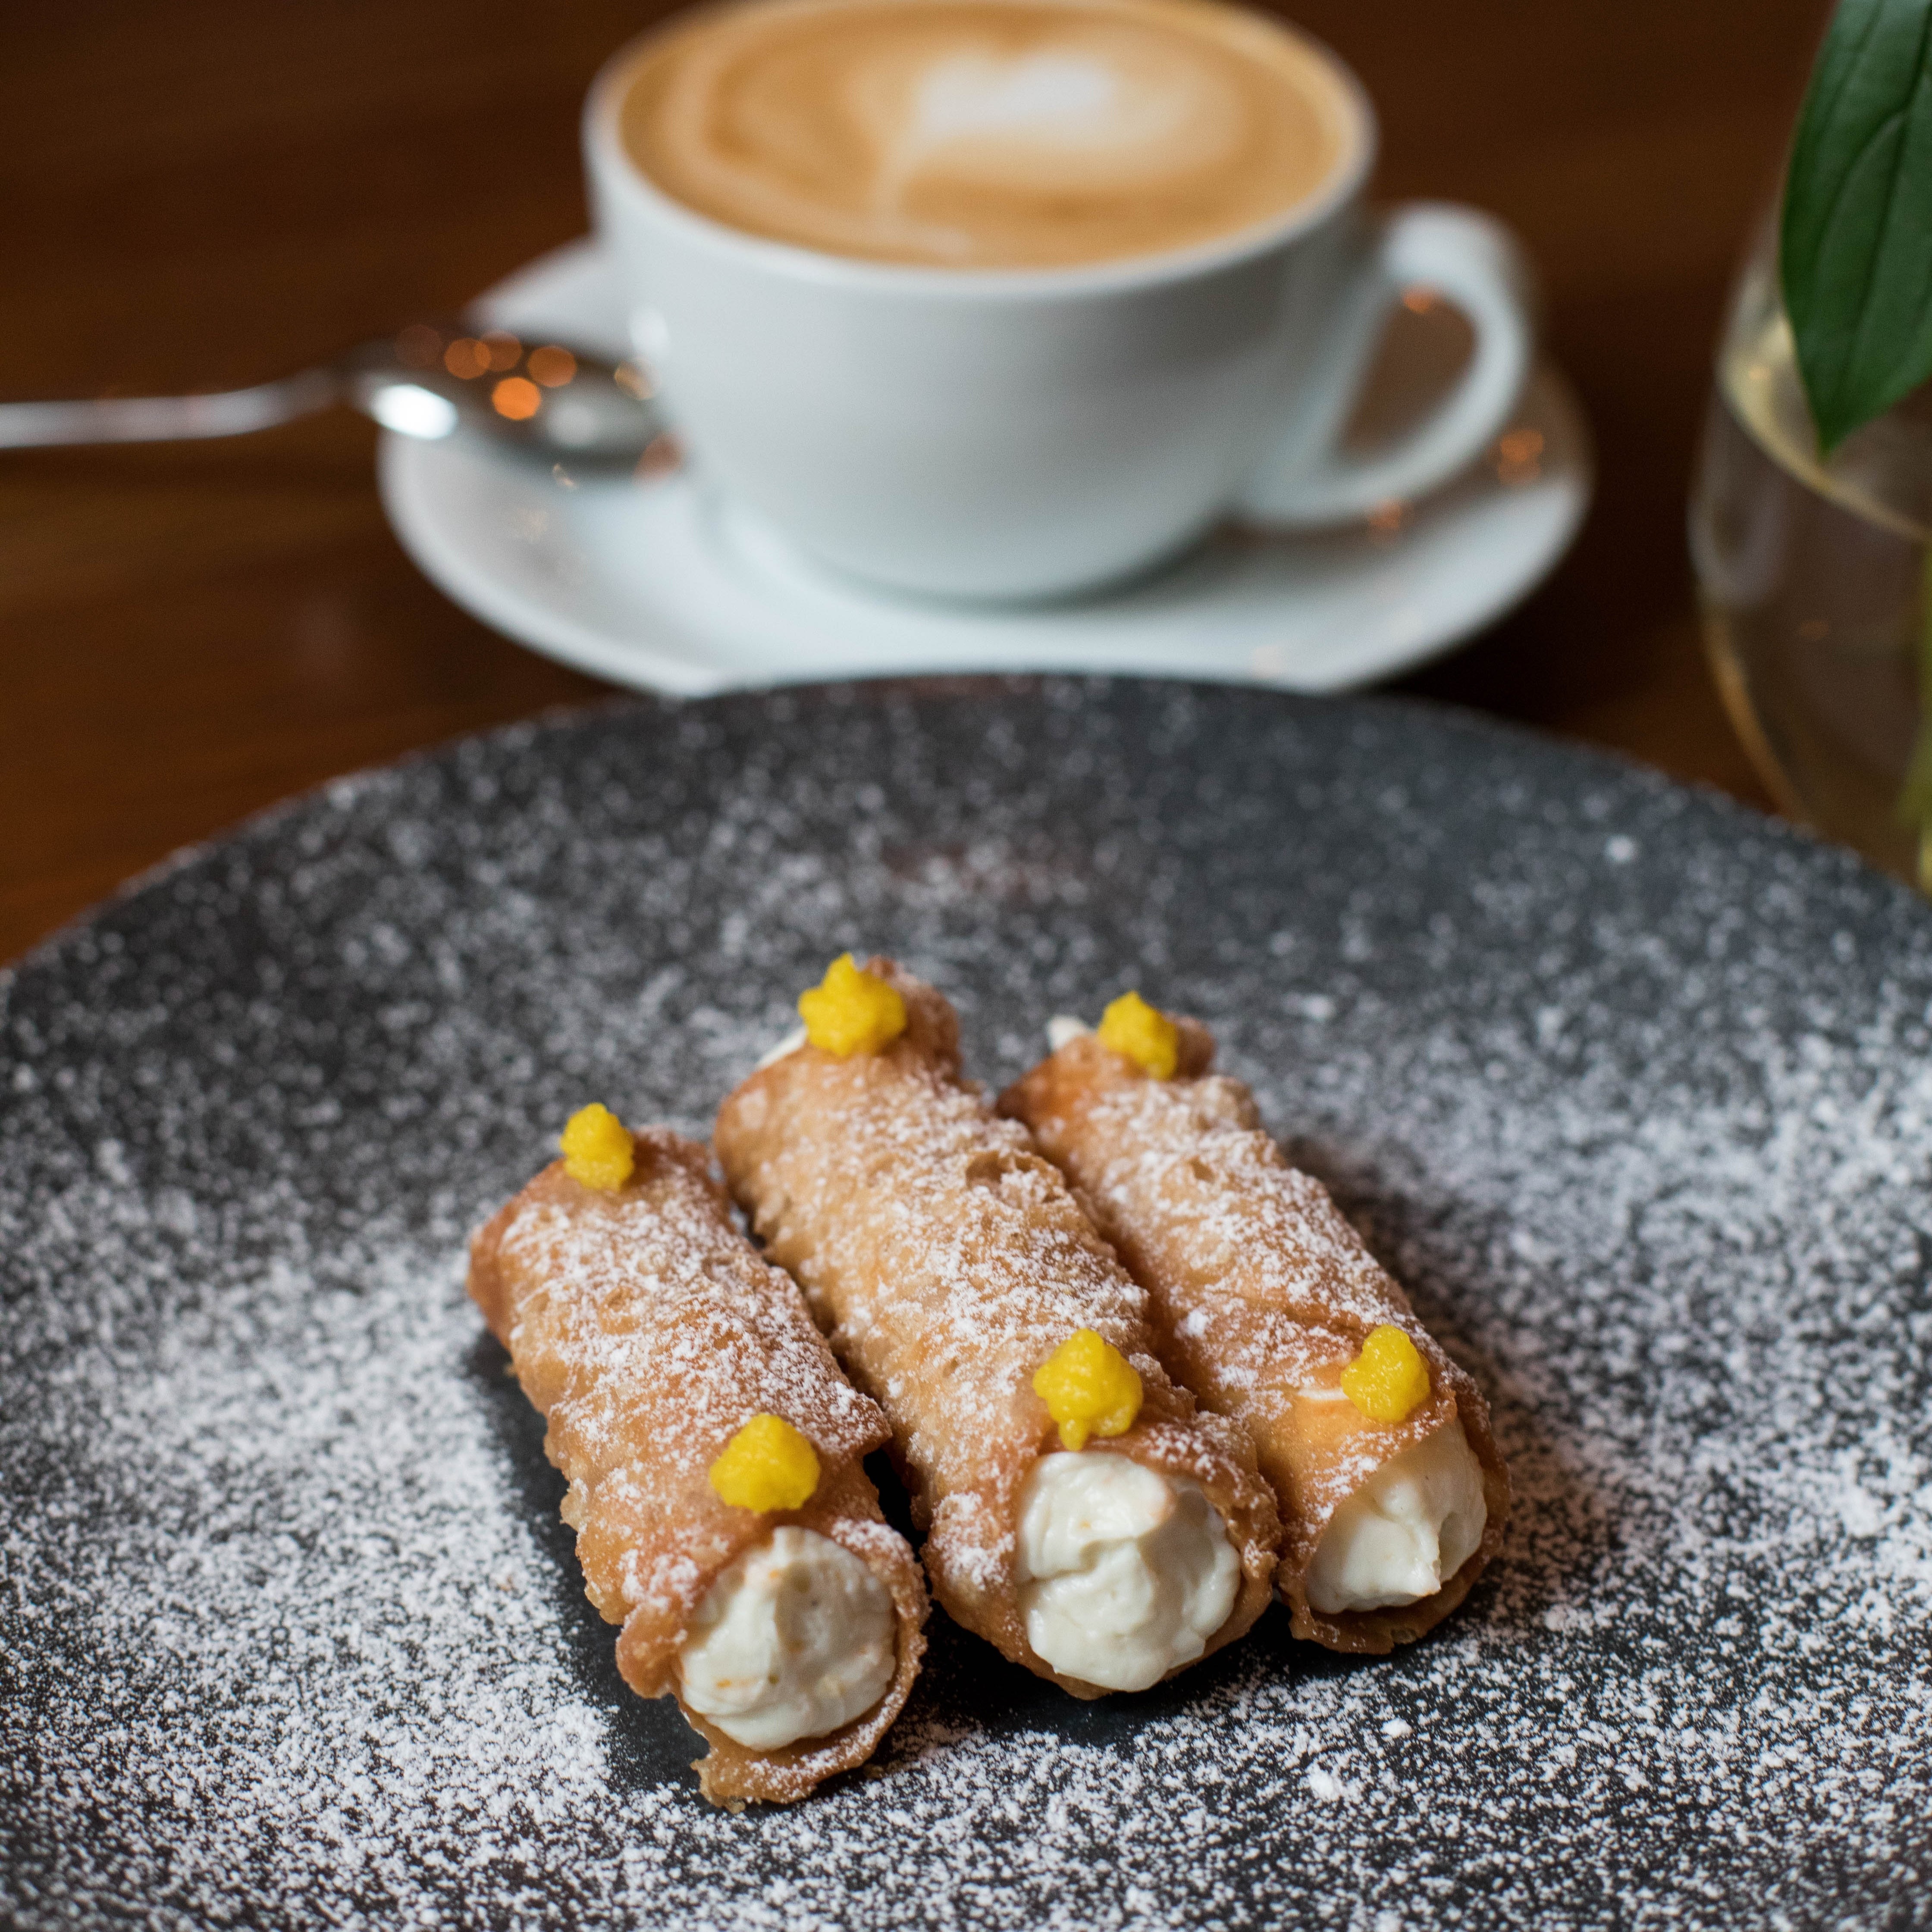 Desserts image with a latte and cannolis